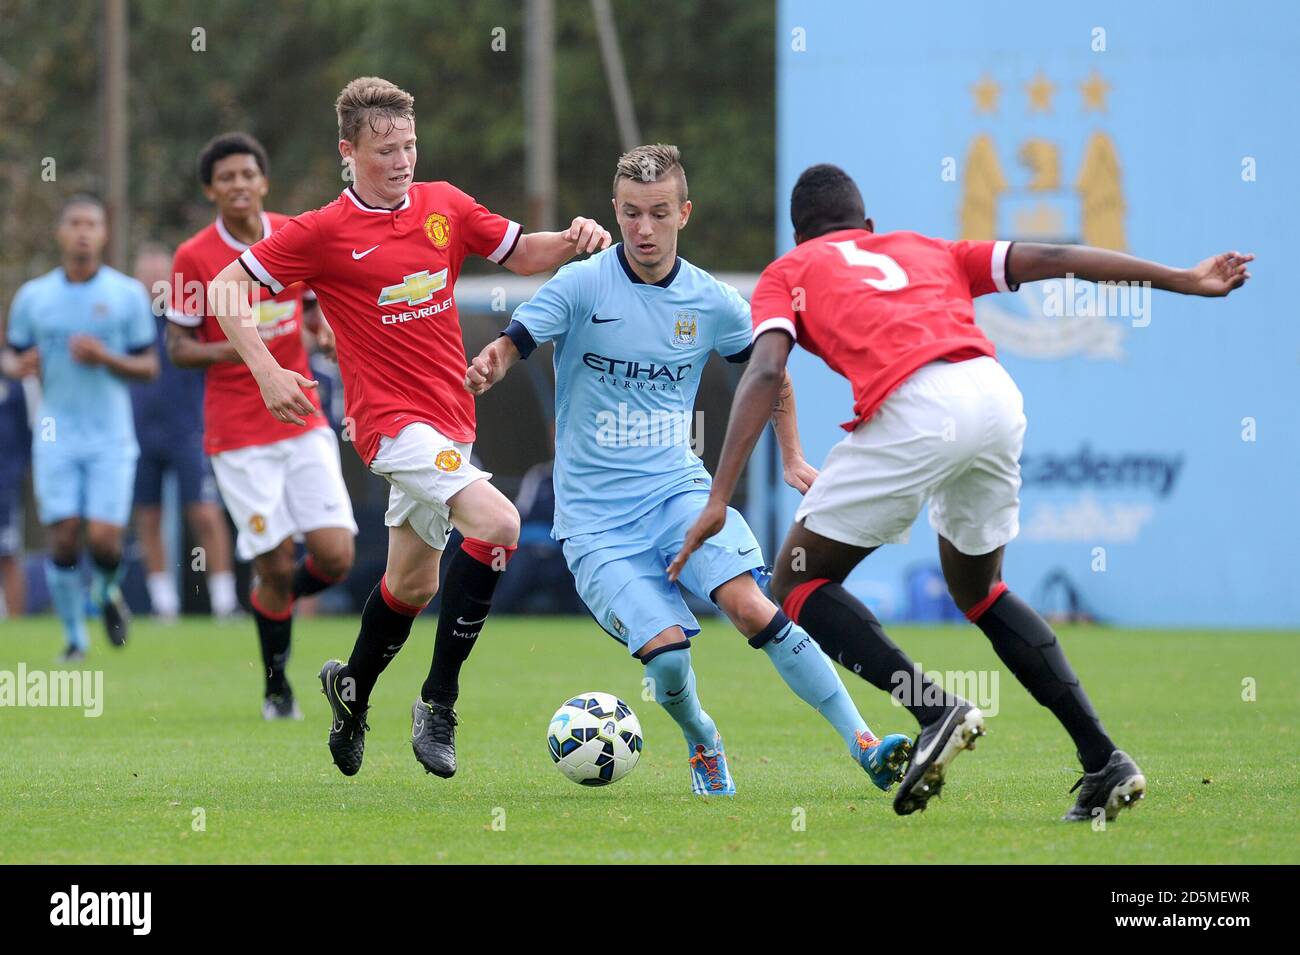 Manchester City's Bersant Celina (centre) takes on Manchester United's Scott McTominay (left) and Ro-Shaun Williams Stock Photo